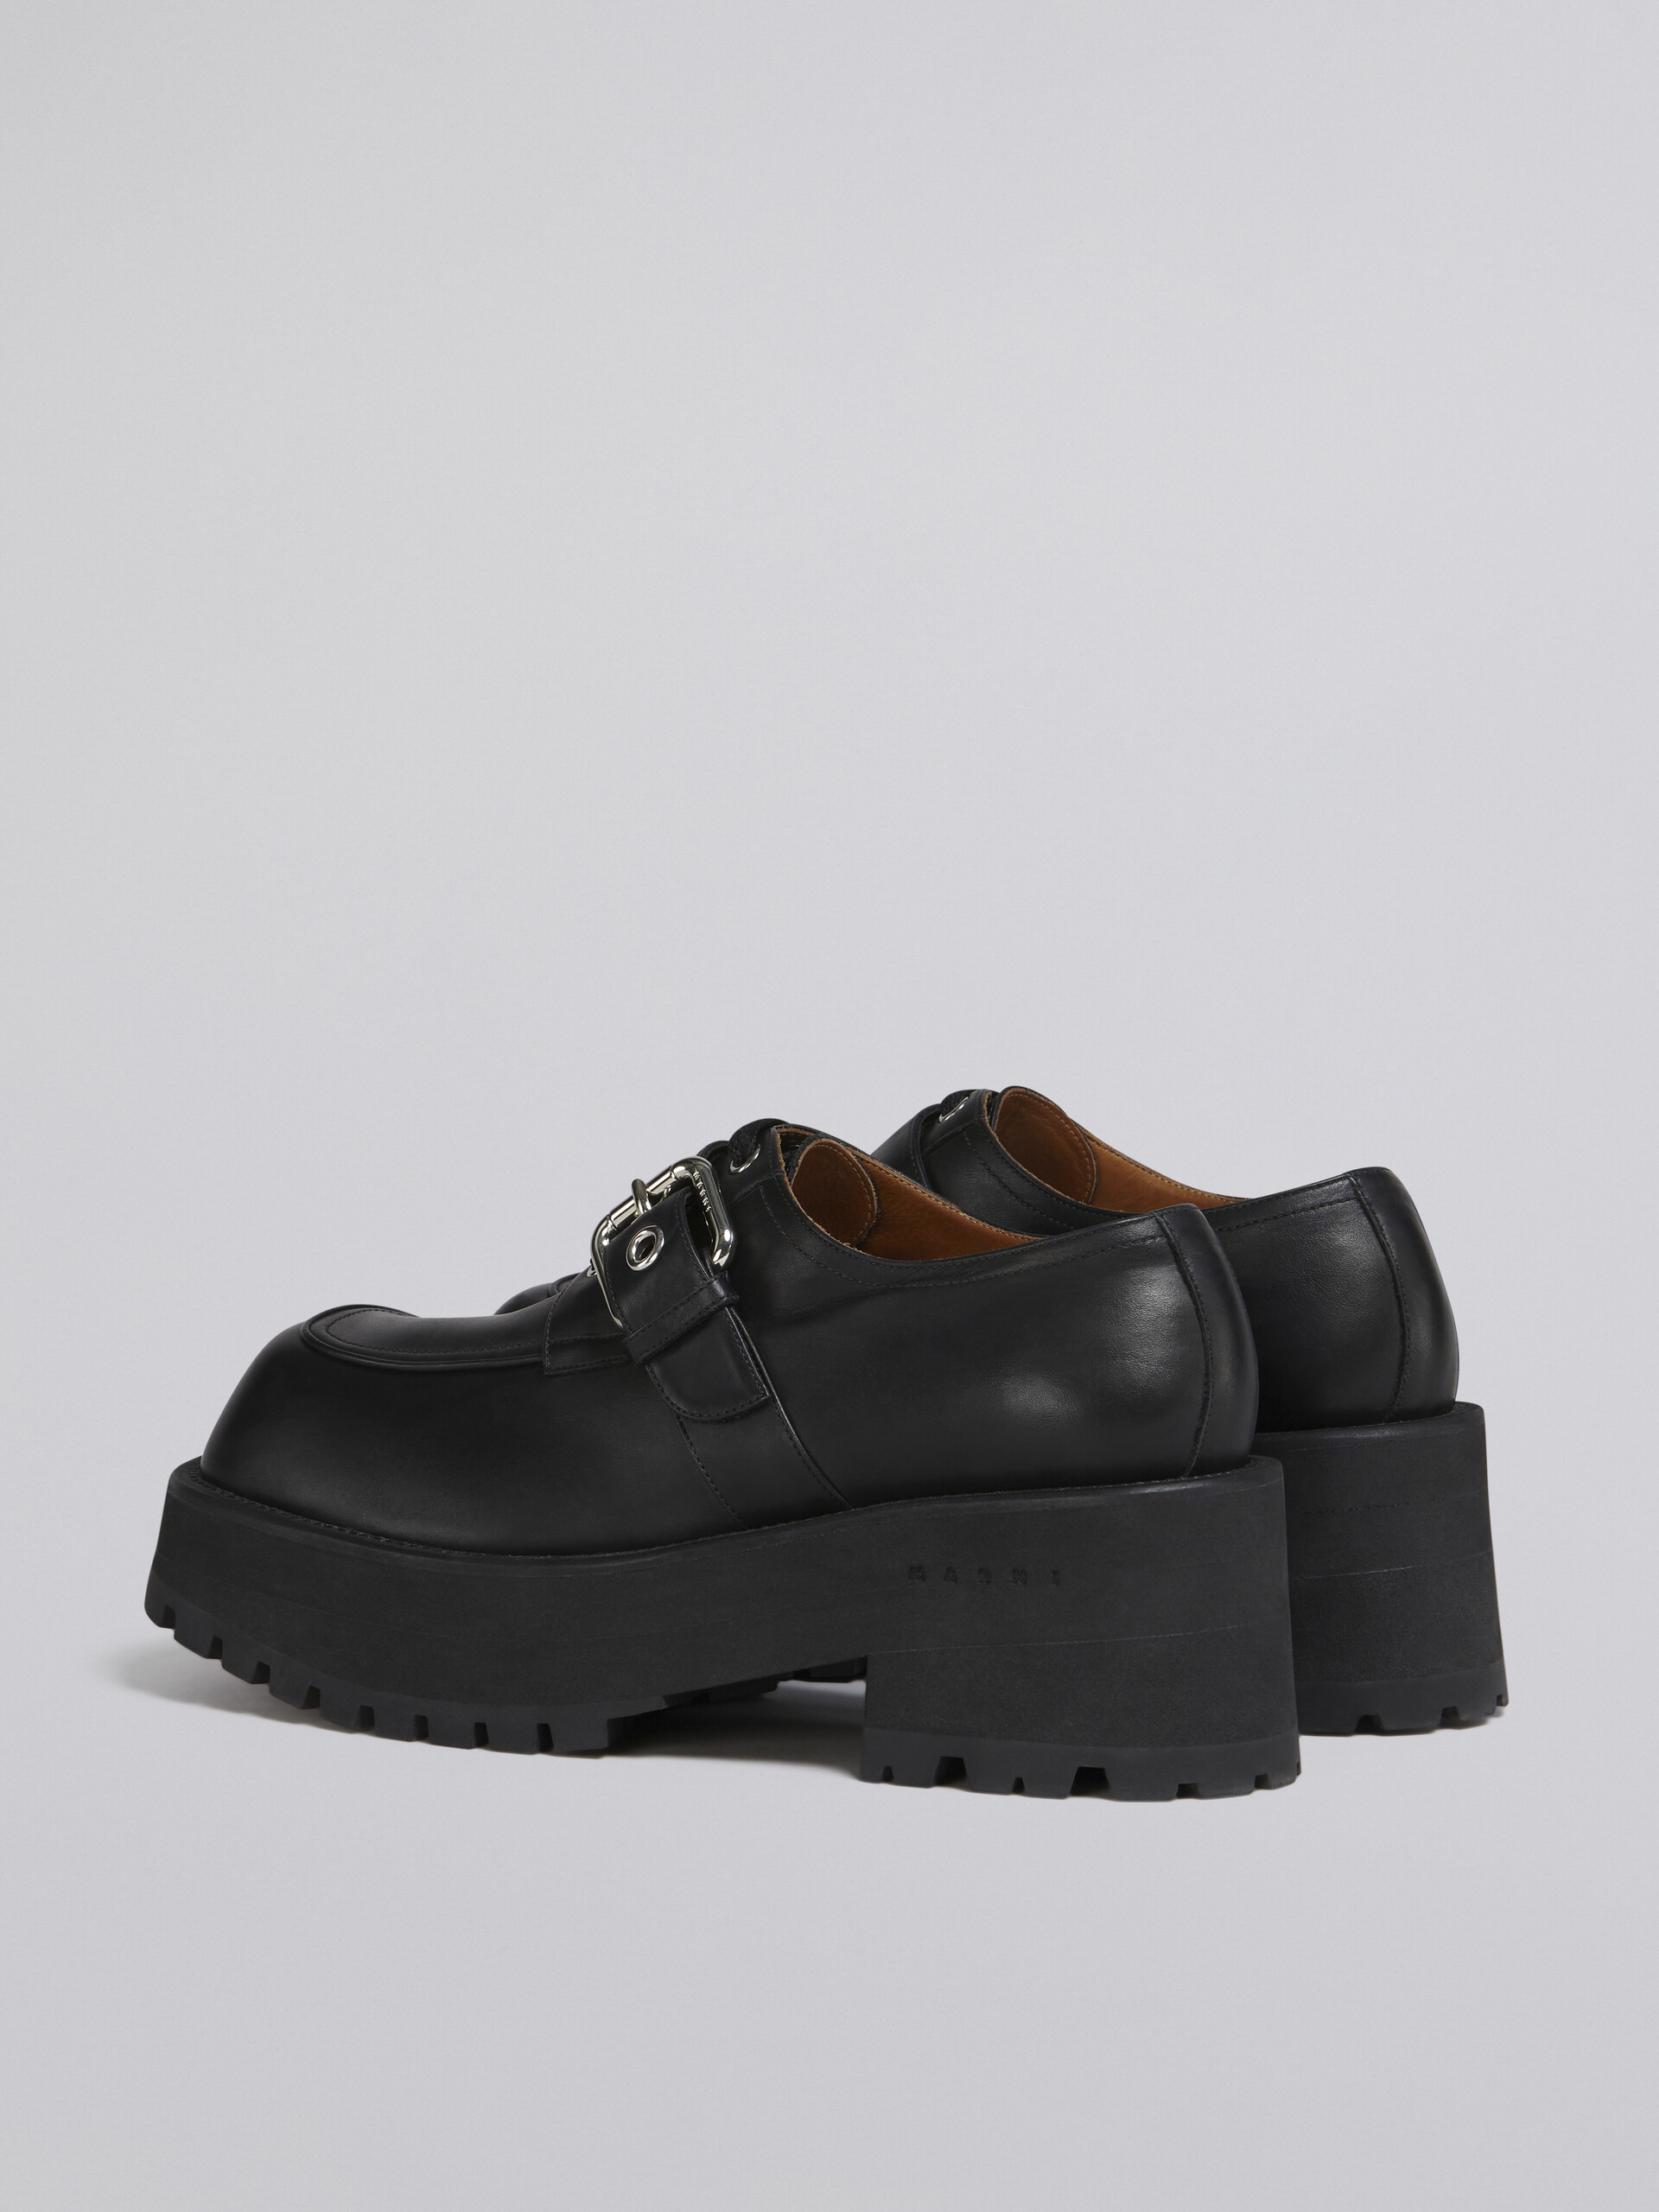 Black soft calf leather moccasin - Lace-ups - Image 3